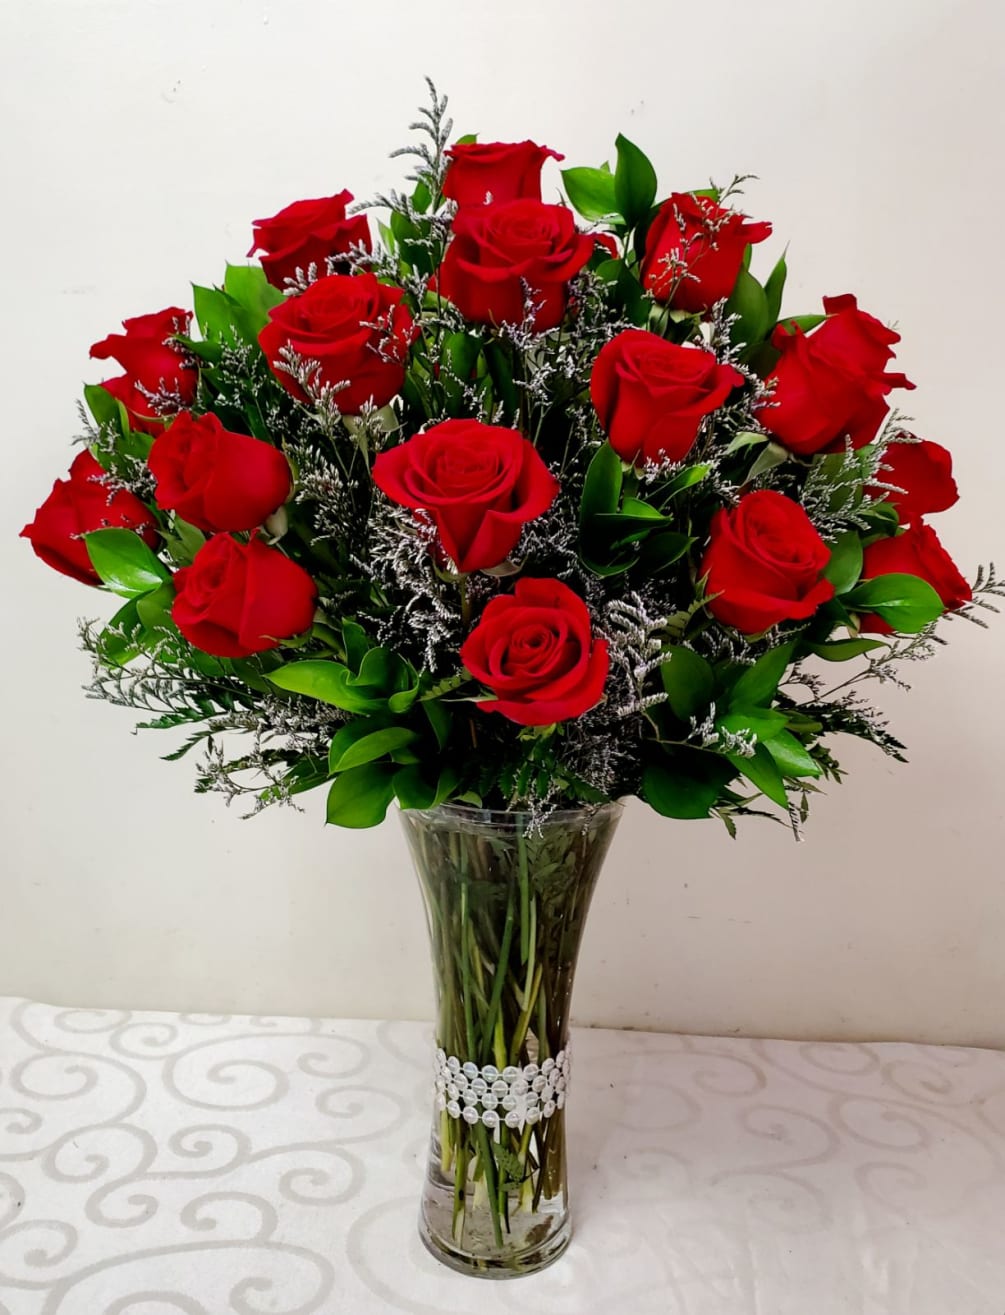 25 Long Stems Roses in a Tall Accented Vase

These beautiful red roses